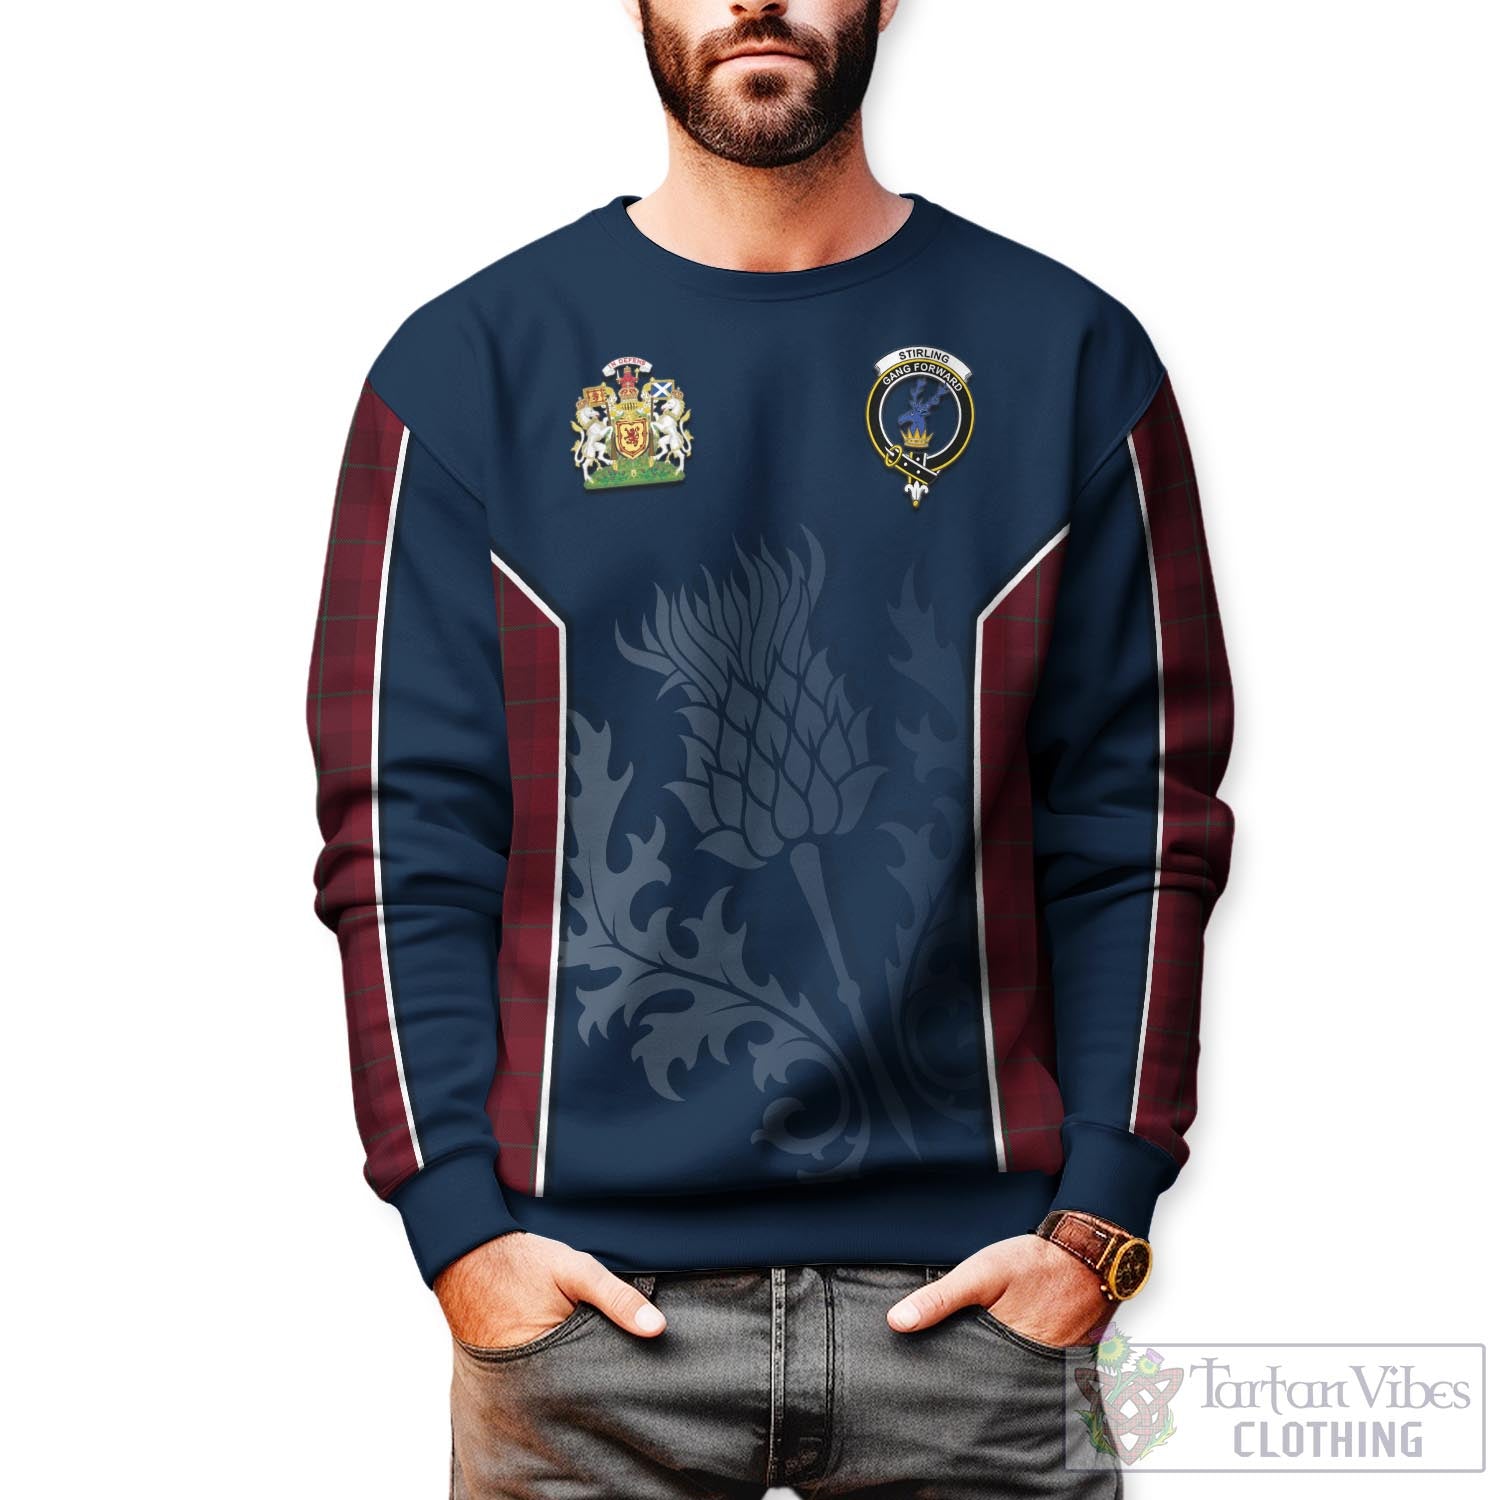 Tartan Vibes Clothing Stirling of Keir Tartan Sweatshirt with Family Crest and Scottish Thistle Vibes Sport Style